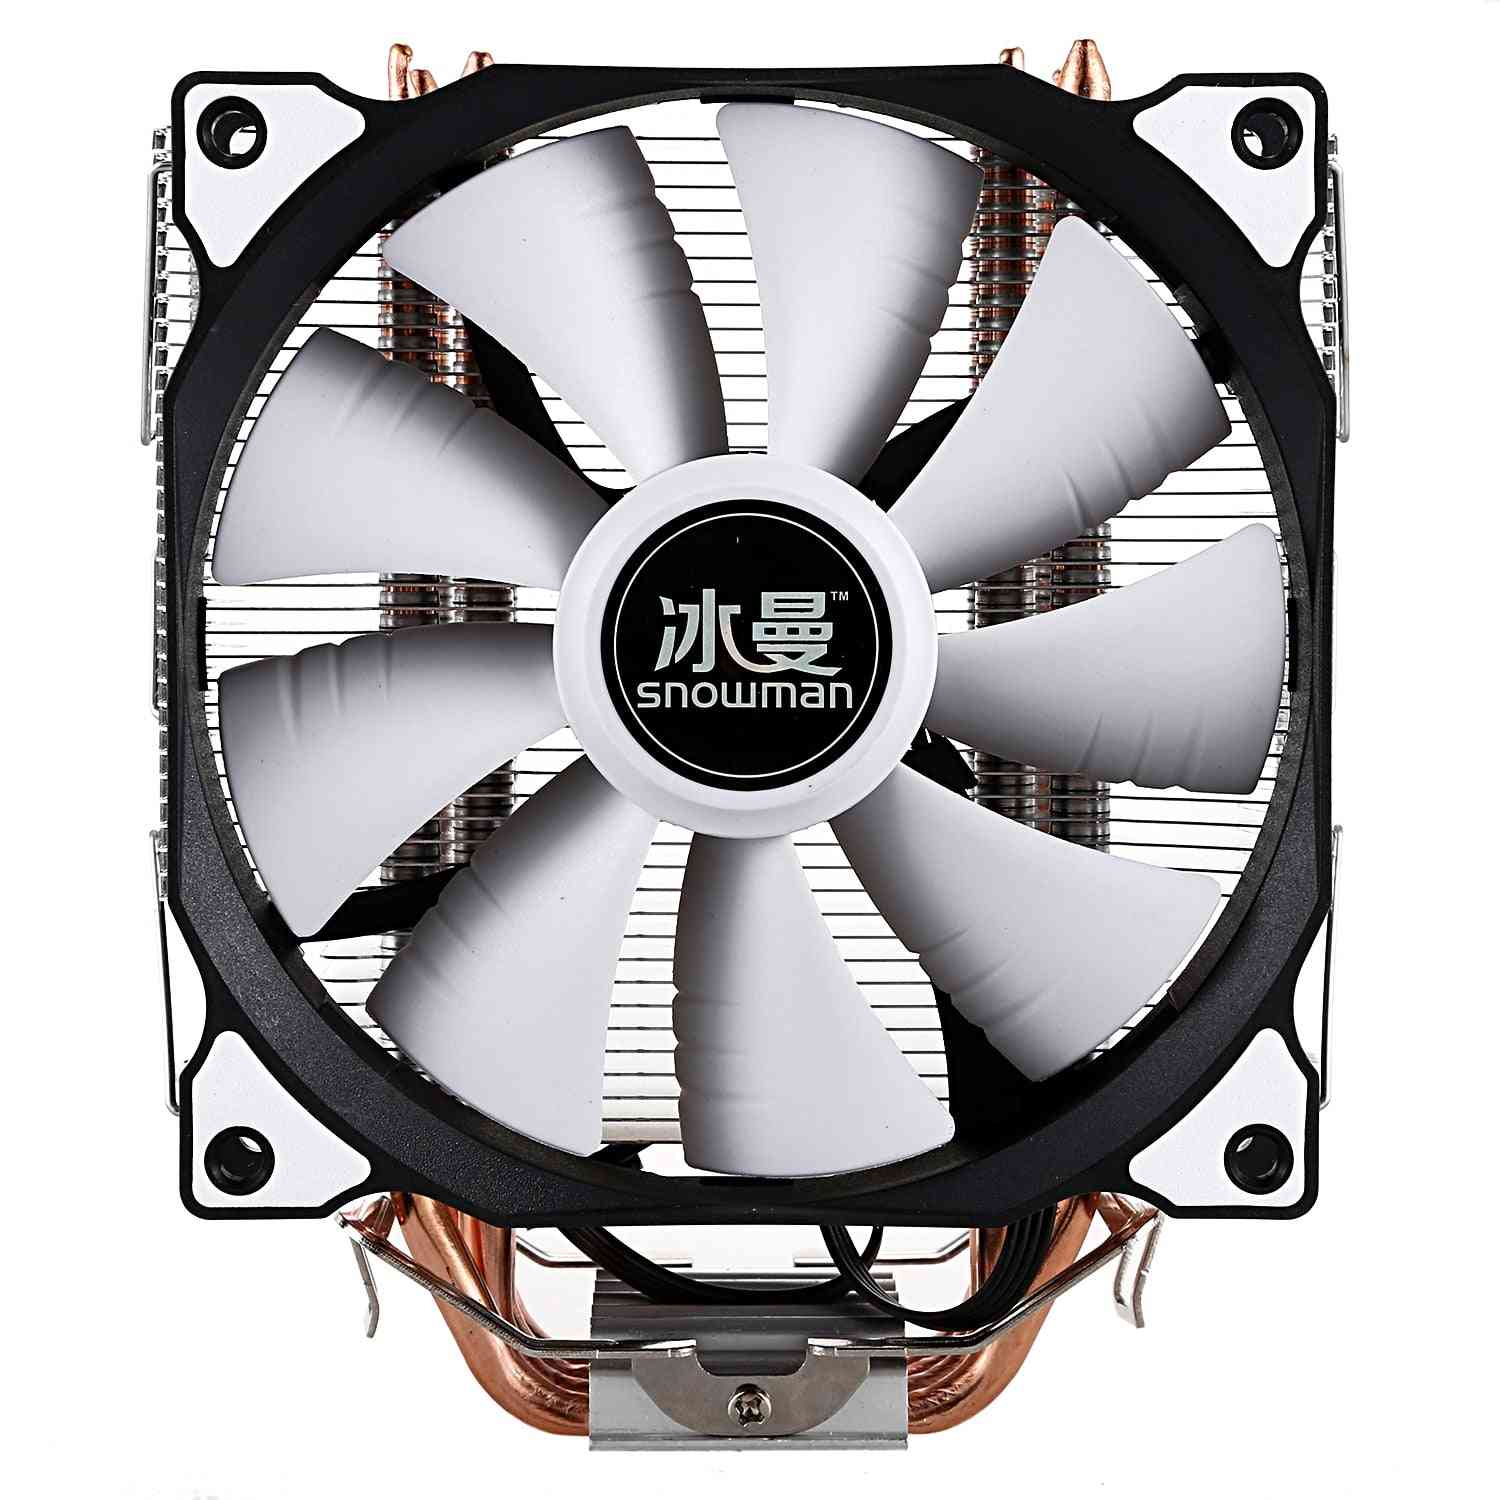 Cpu Cooler, Master Pure Copper Heat-pipes, Freeze Tower Cooling System, Fan With Pwm